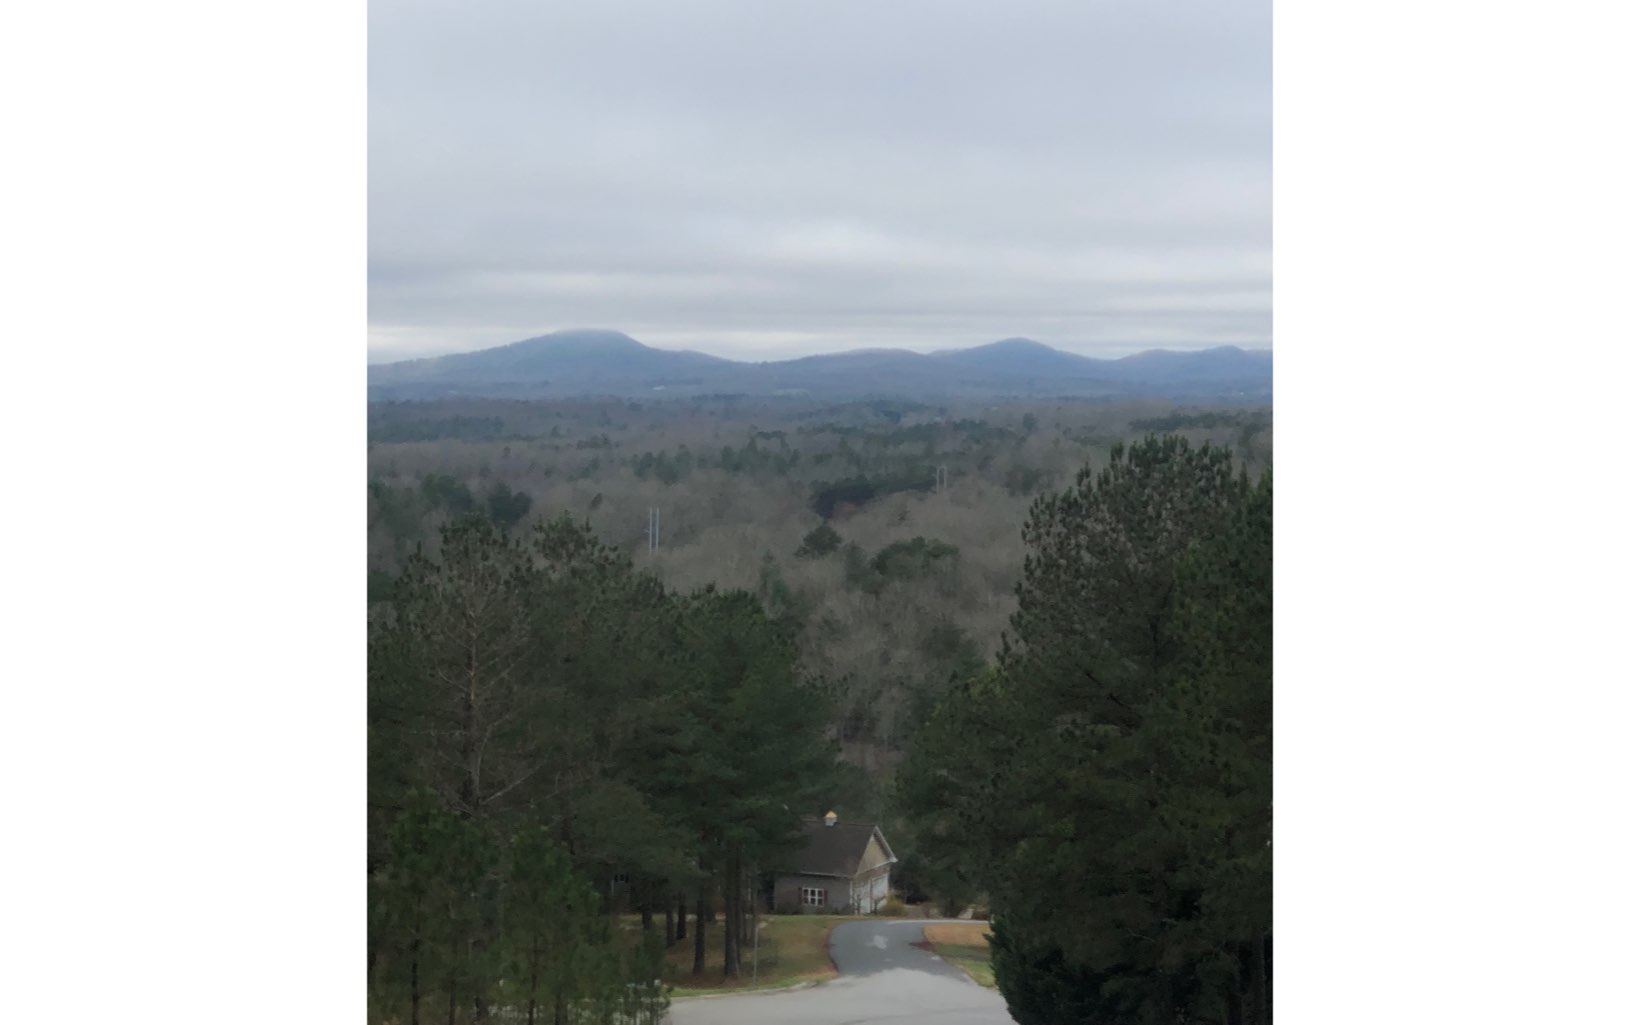 Gorgeous year round MOUNTAIN VIEWS ON A CORNER LOT in upscale community, near marina & Lake Nottely. Close to town, public golf course and Murphy NC. underground utilities, county water, and paved roads with curbing. This is a beautiful lot for your dream home.